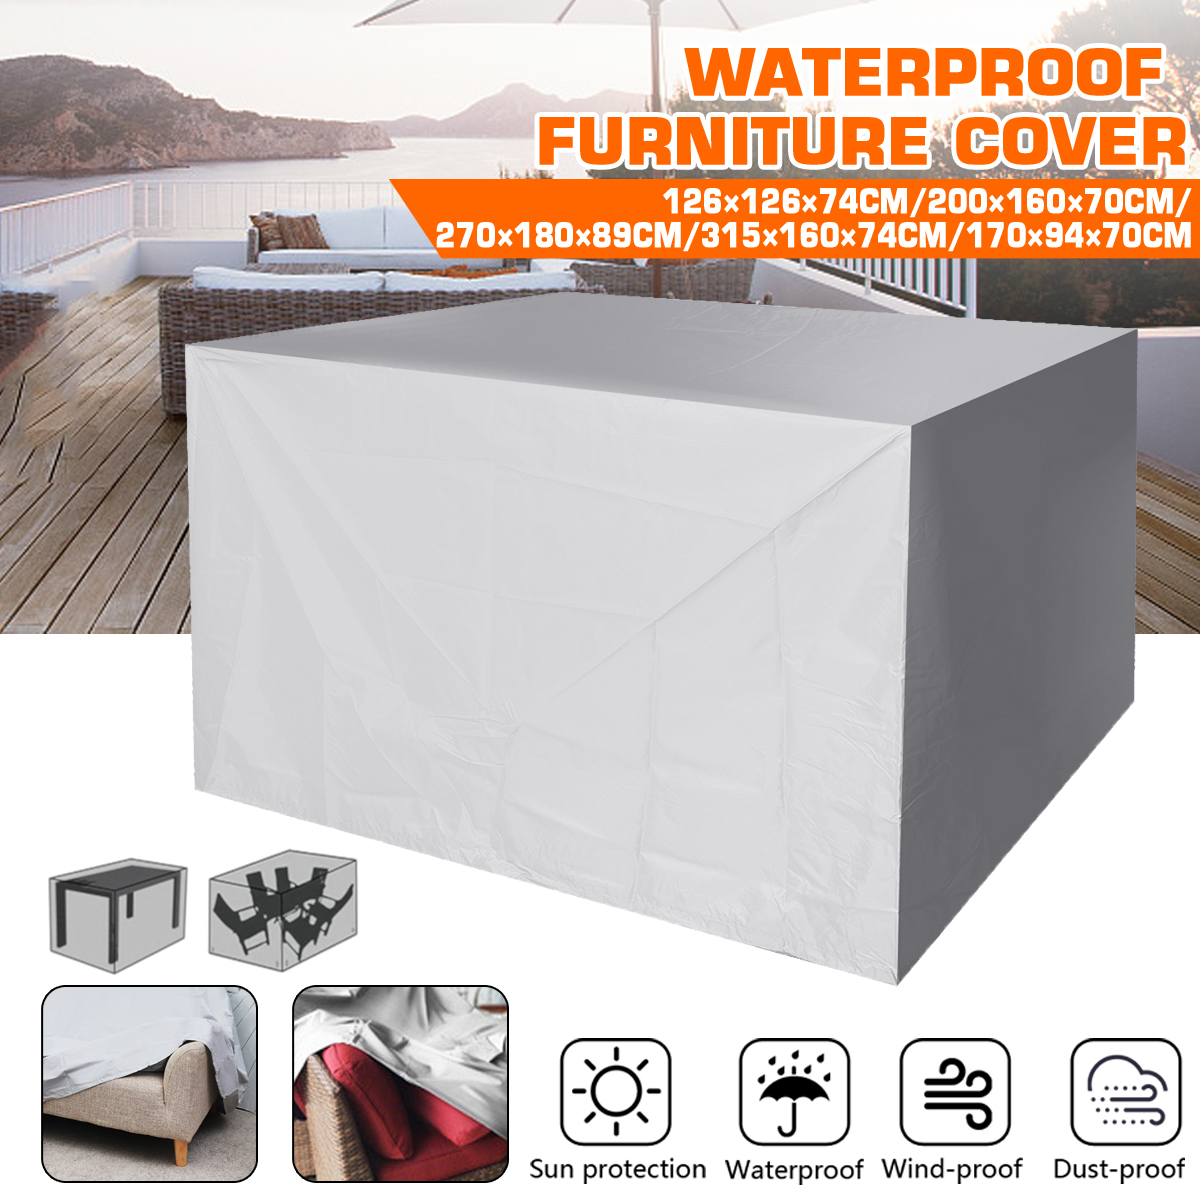 Outdoor-Waterproof-Furniture-Cover-Sofa-Chair-Table-Cover-Garden-Patio-Bench-Protector-1603519-1